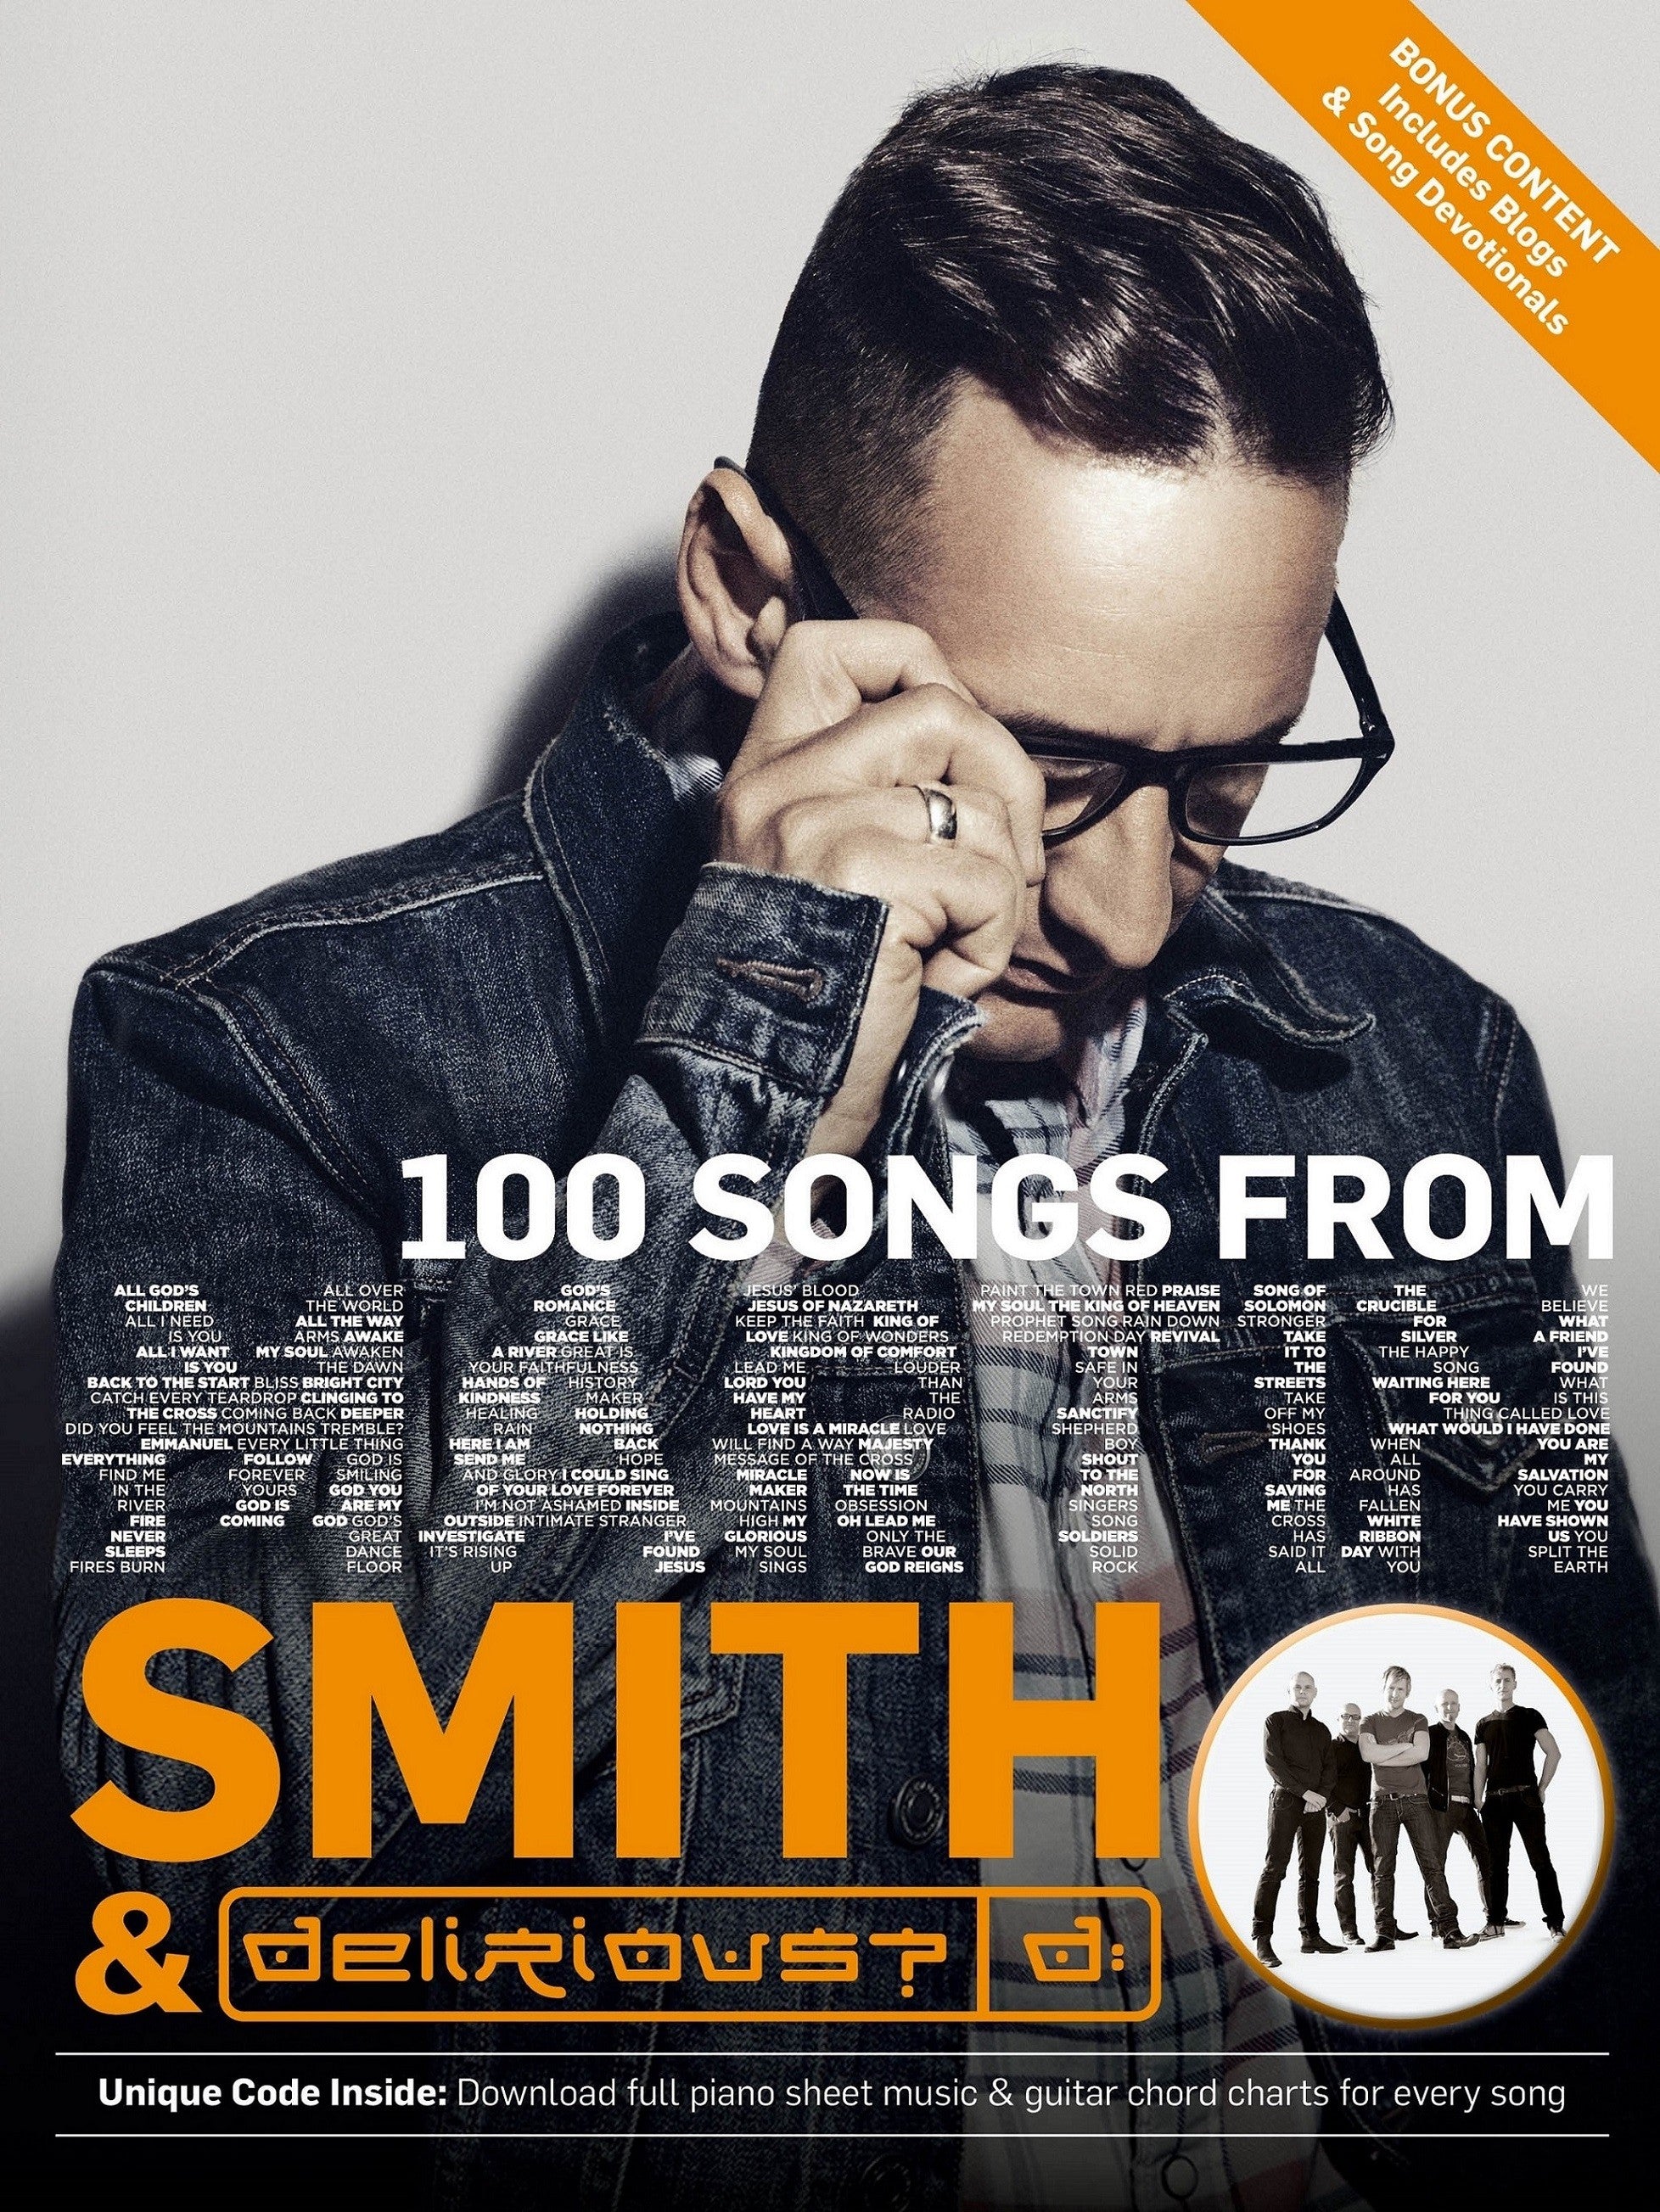 Image of 100 Songs From Martin Smith & Delirious? other